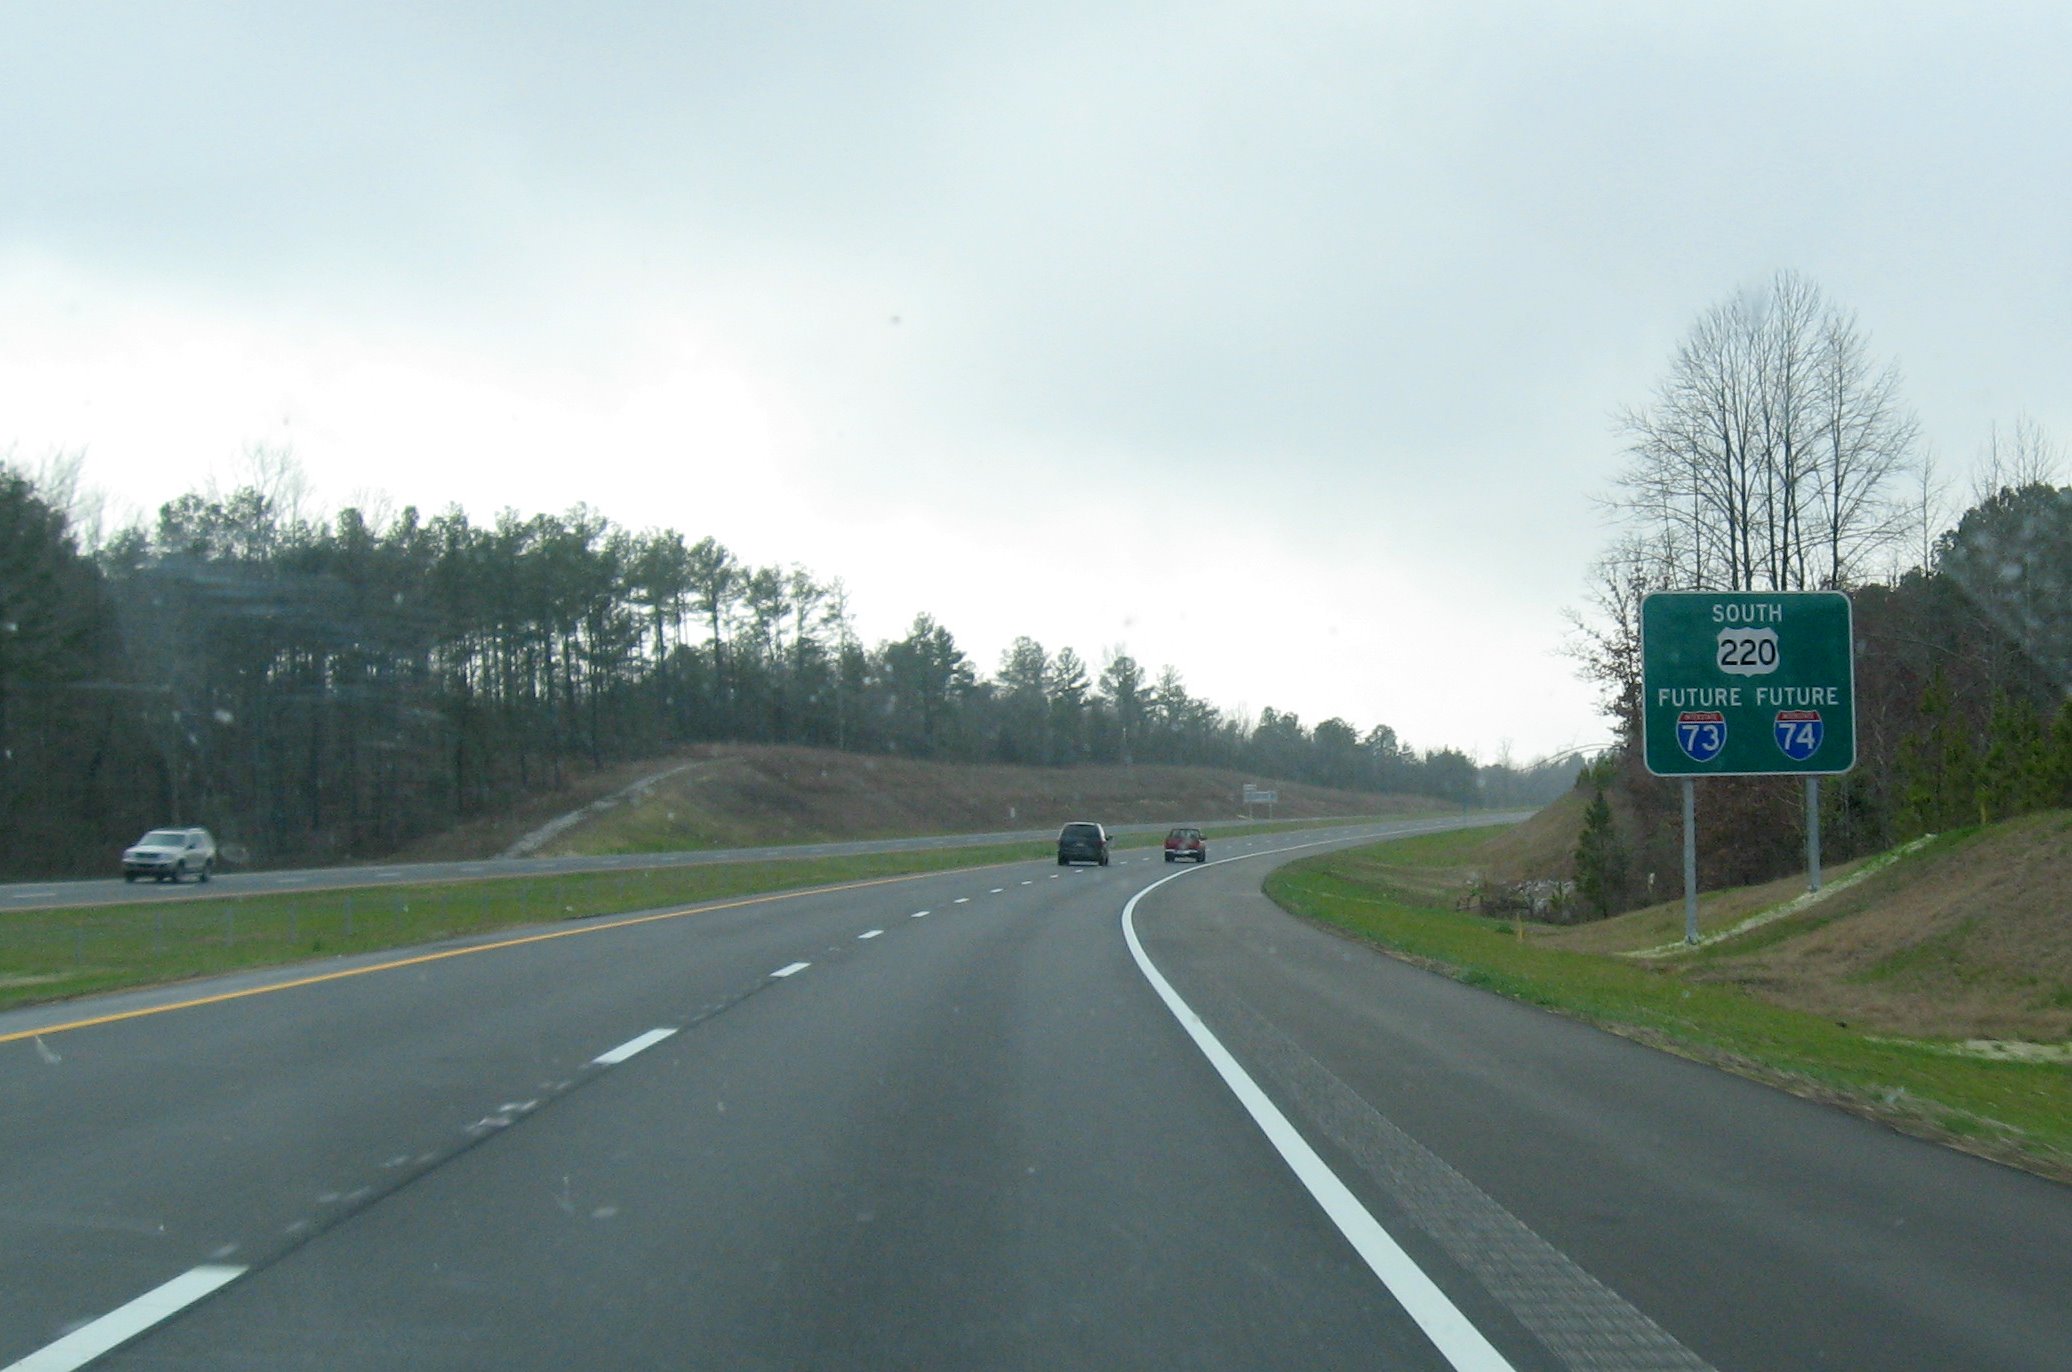 Photo of route sign for along Future I-73/I-74 heading southbound, Feb. 
2008